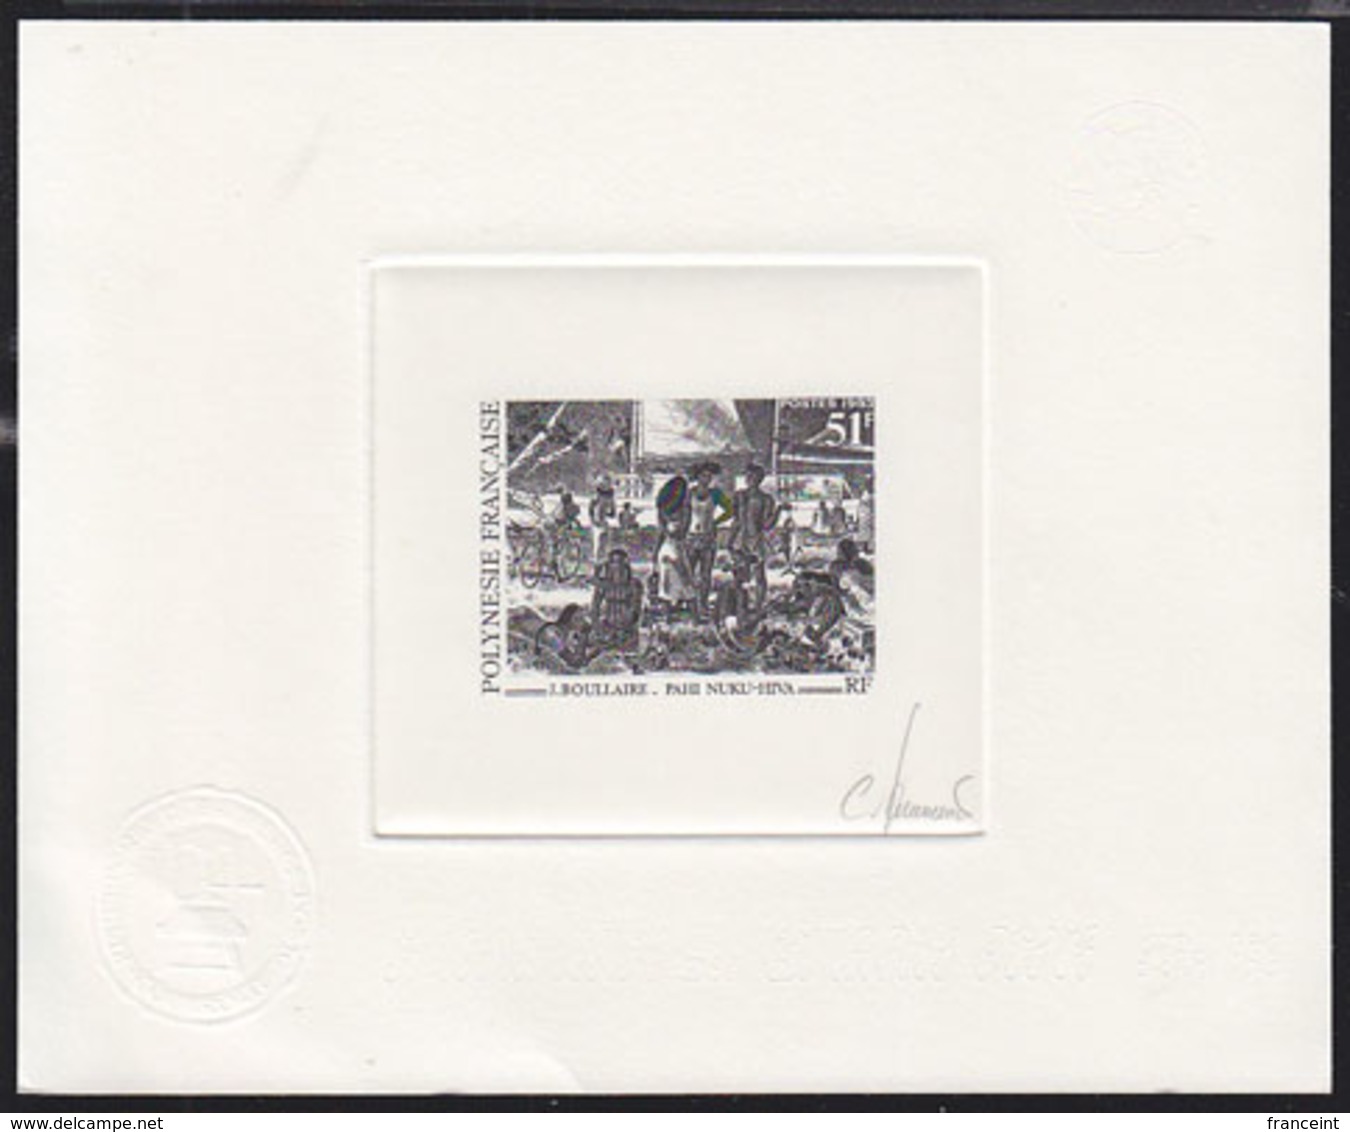 FRENCH POLYNESIA (1993) Nuku Hiva.  Die Proof In Black Signed By The Engraver JUMELET. Scott No 619, Yvert No 435. - Imperforates, Proofs & Errors